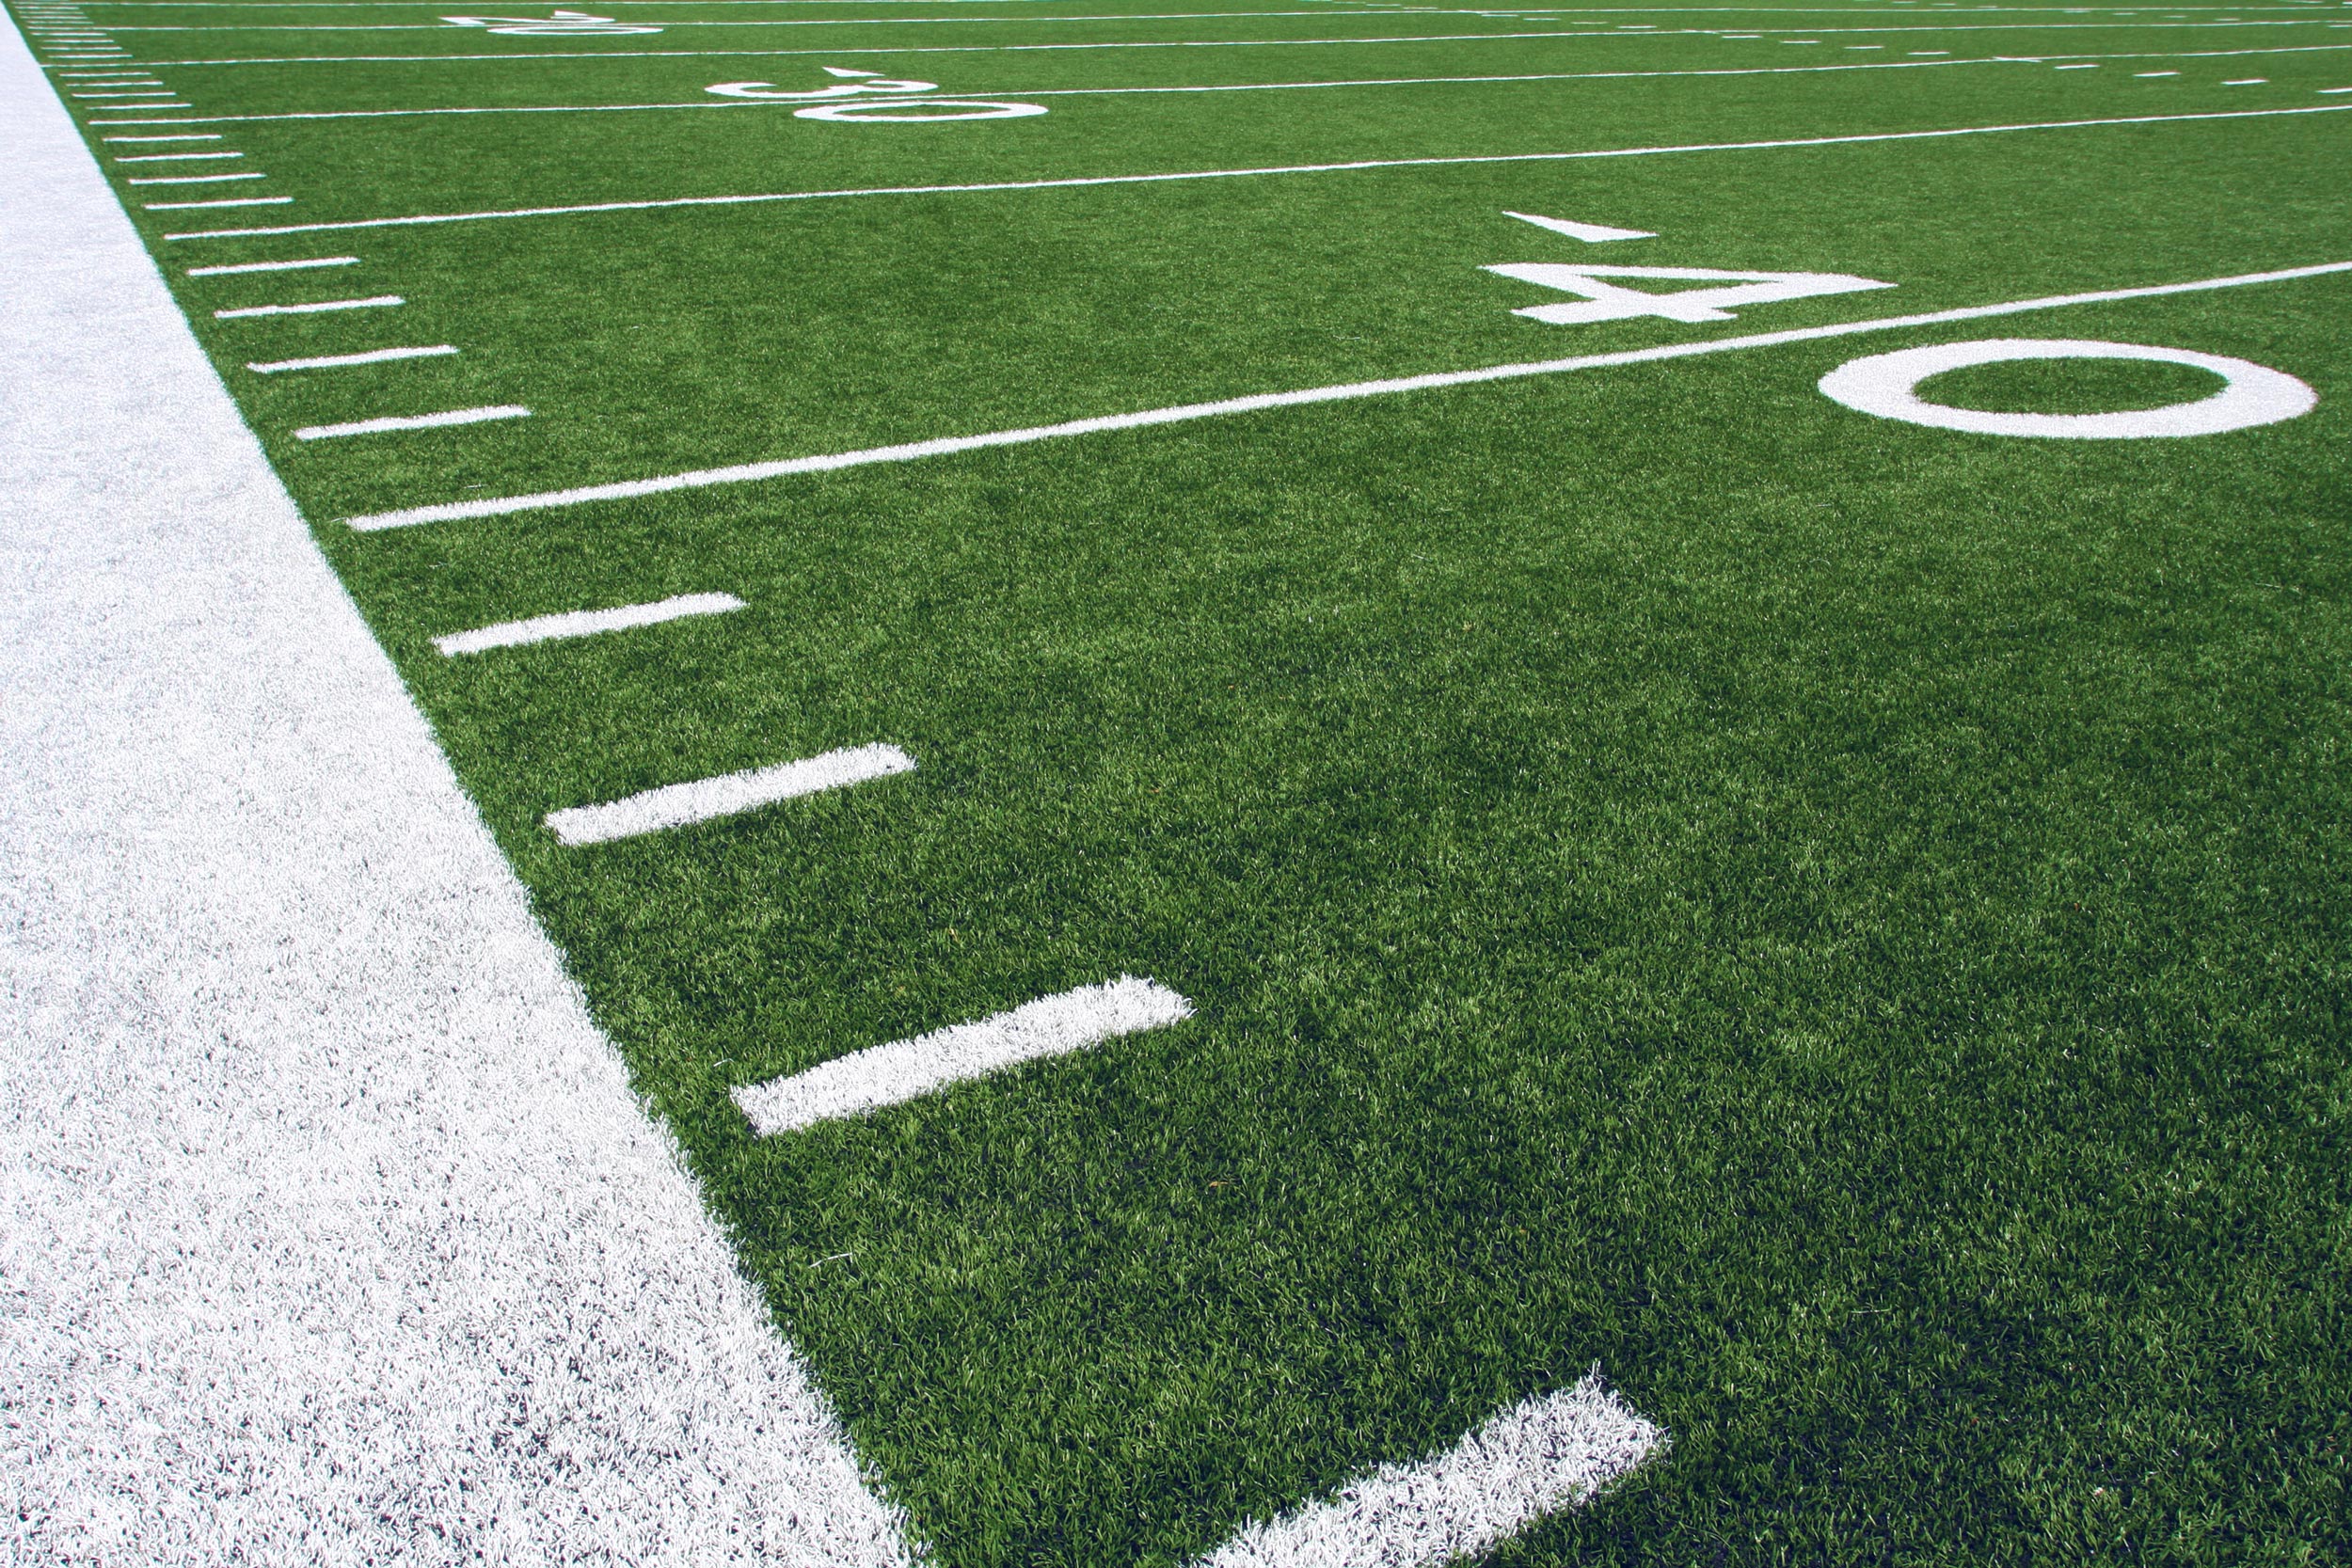 Up close view of a football field